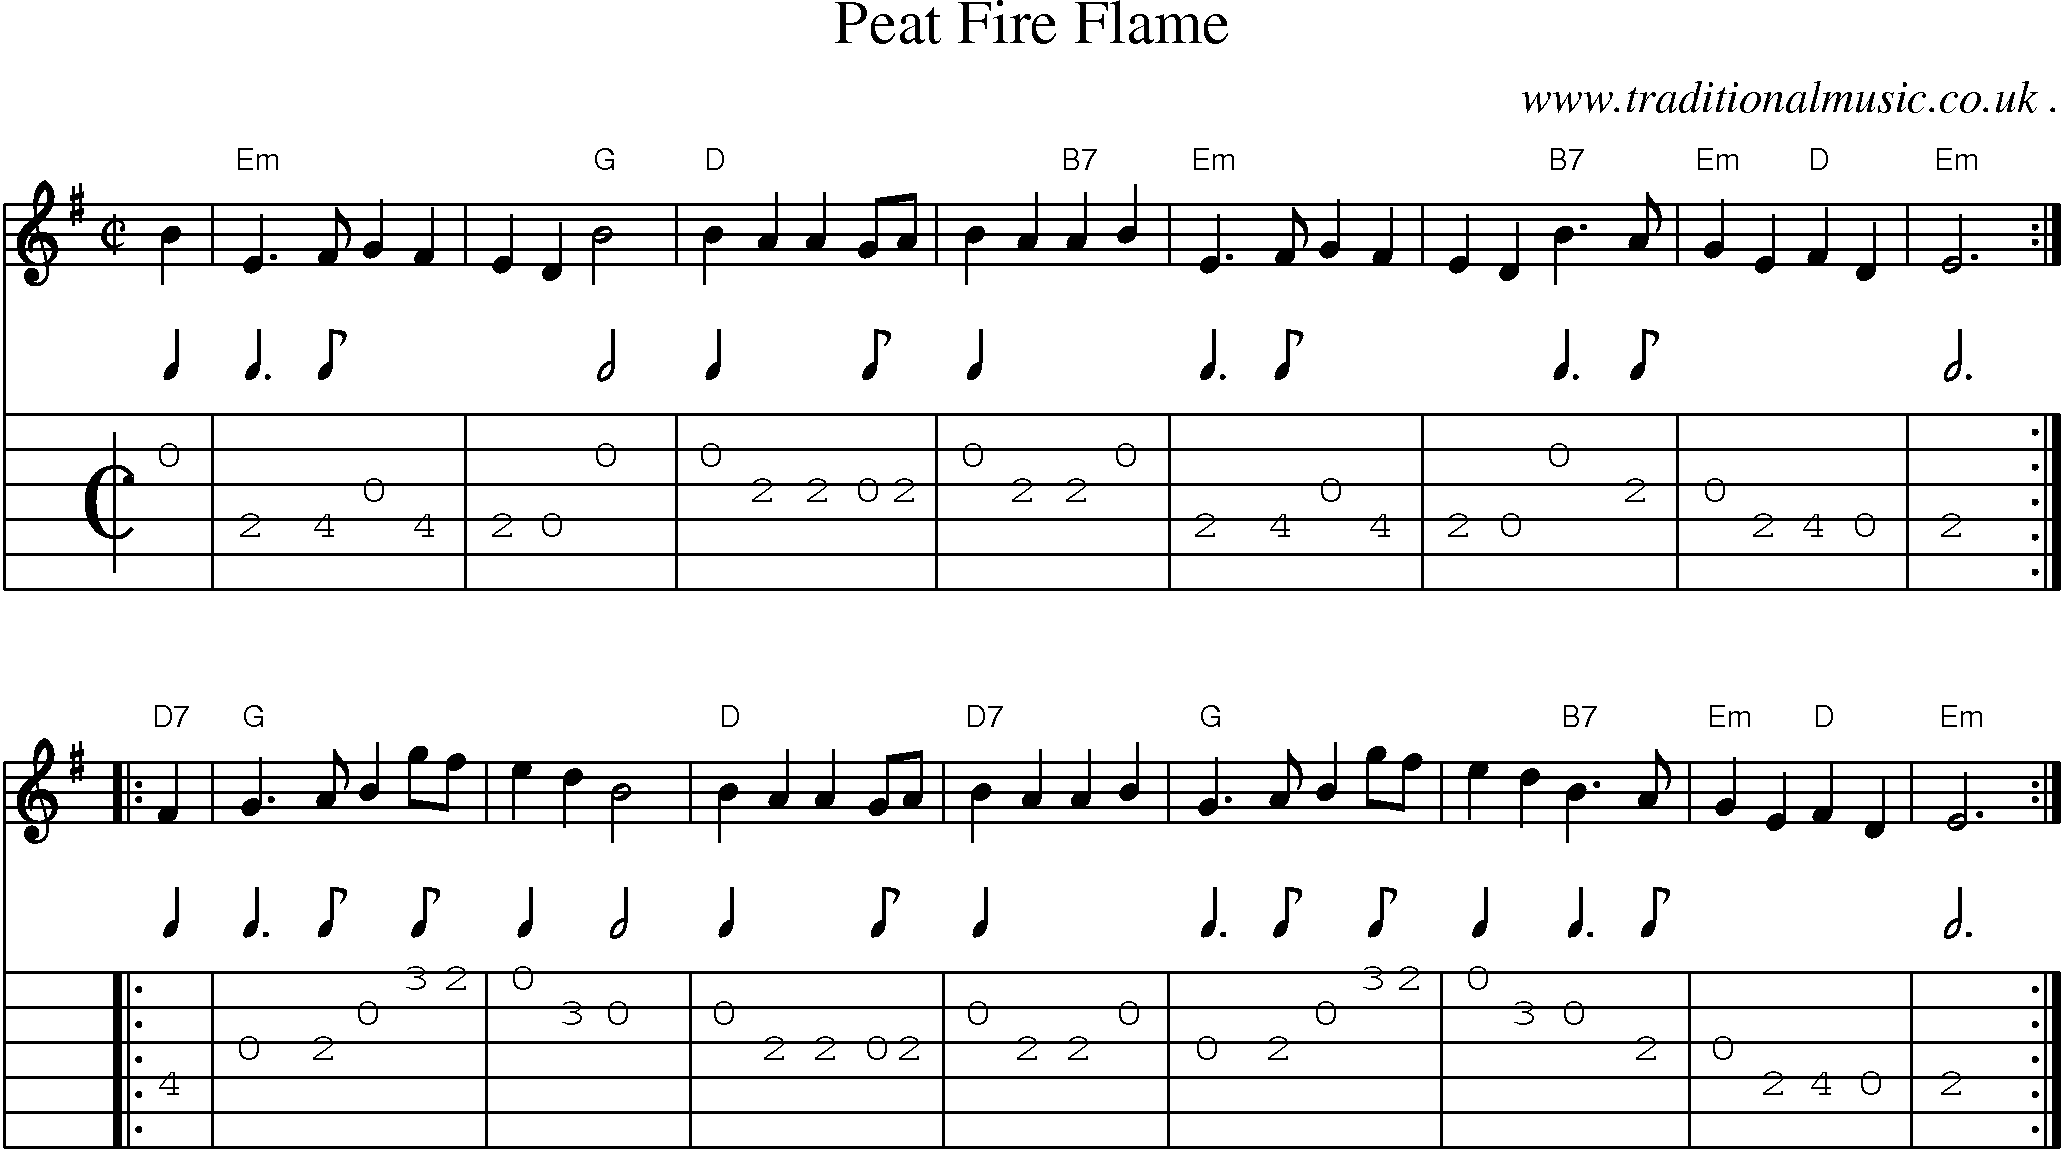 Sheet-music  score, Chords and Guitar Tabs for Peat Fire Flame